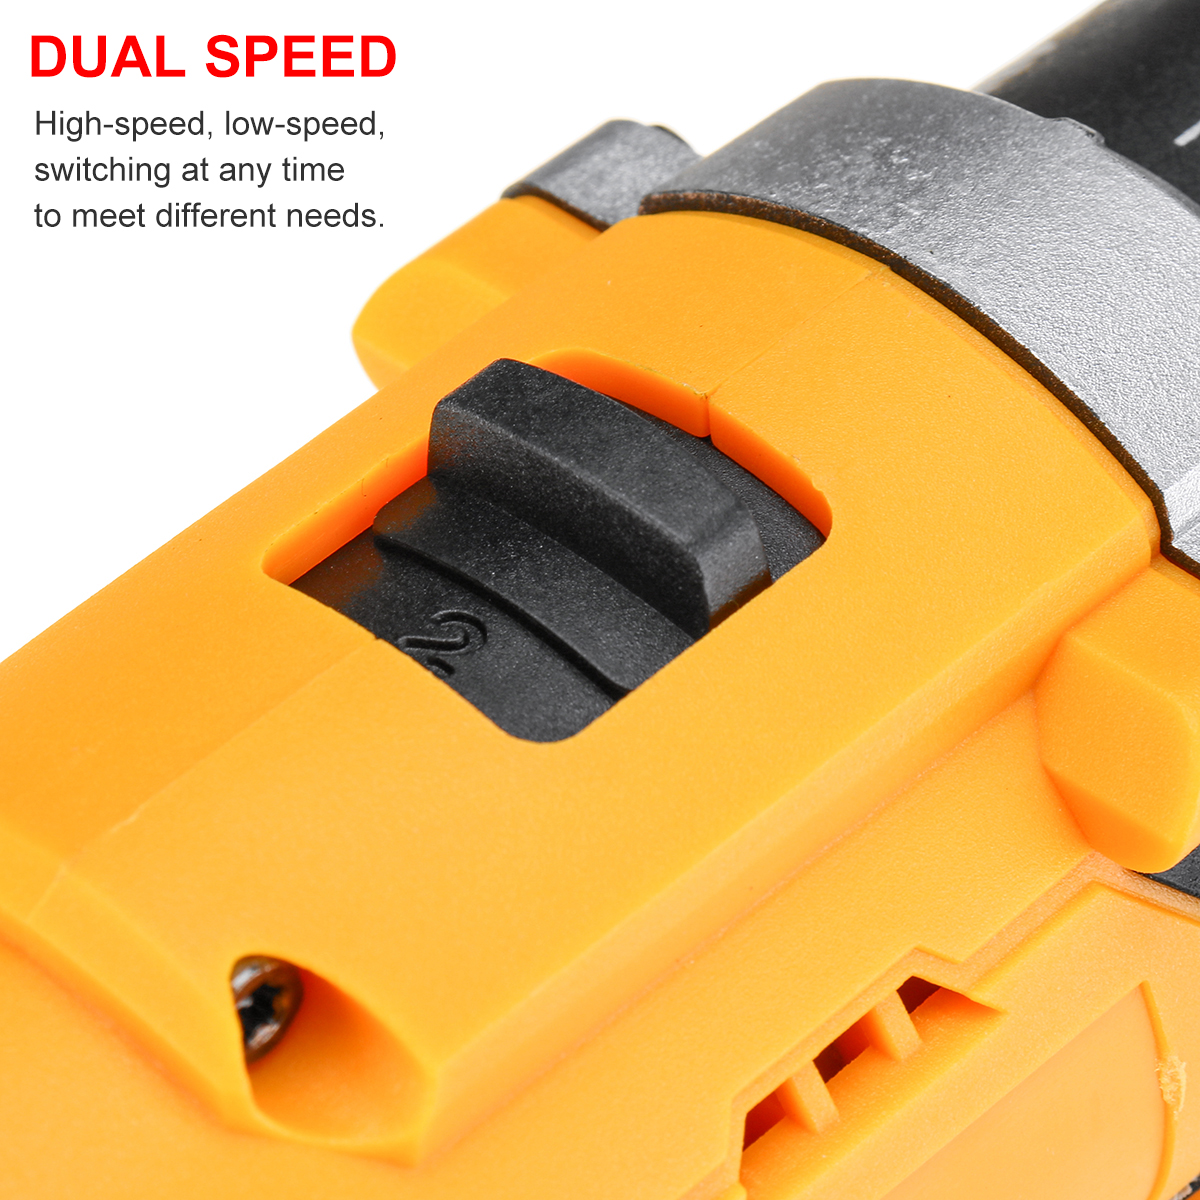 121821V-251-Torque-2-Speed-Cordless-Electric-Drill-Screwdriver-W-LED-Light-1733758-4